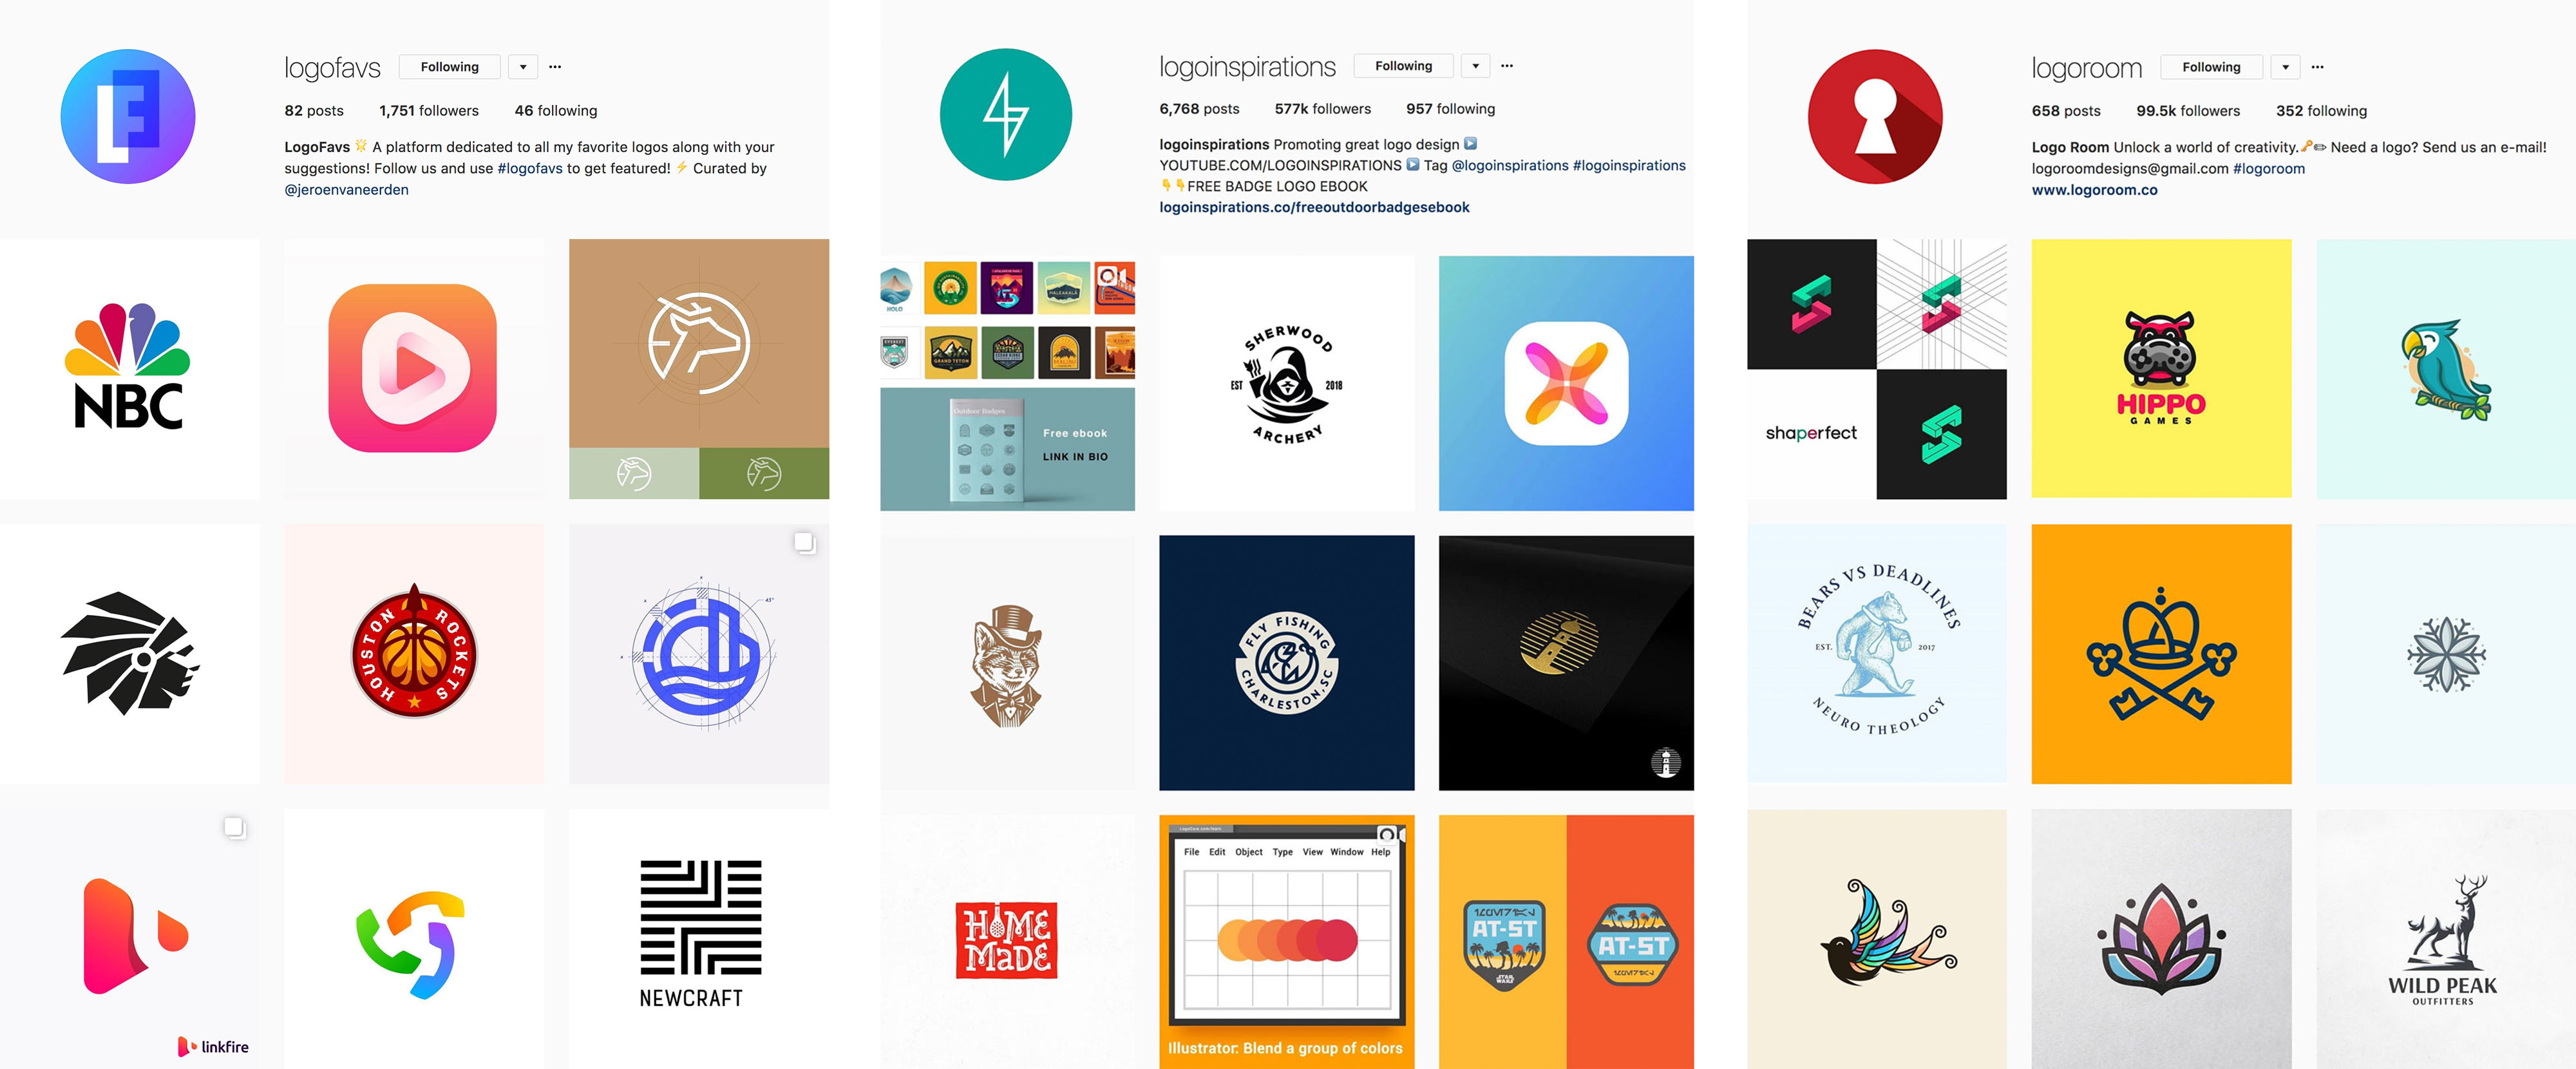 the 18 best instagram accounts for logo design inspiration - how to send instagram followers to another account